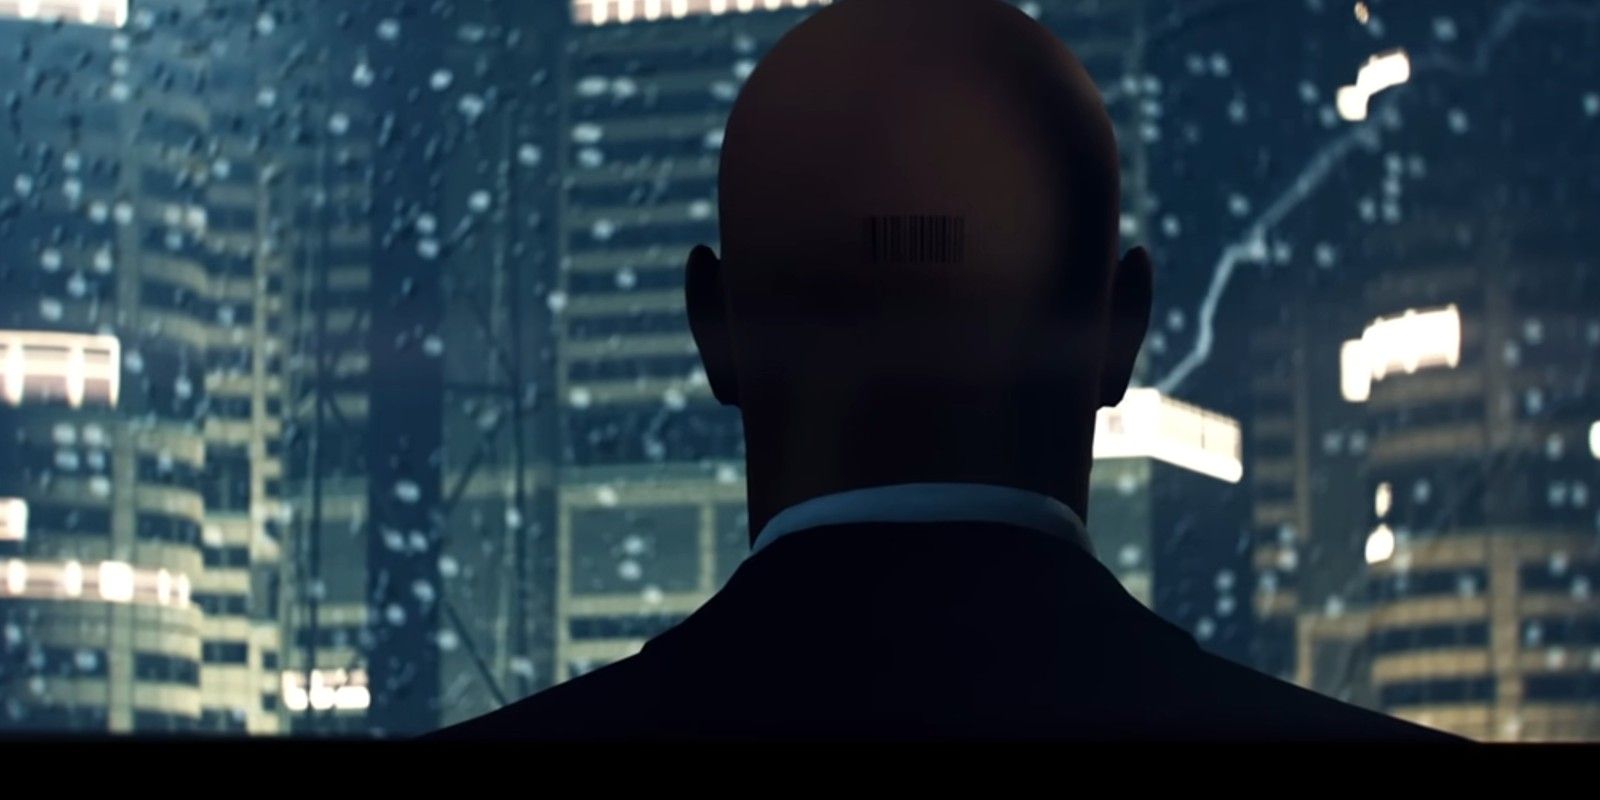 Hitman: Freelancer's Agent 47 looks out on a rainy cityscape.